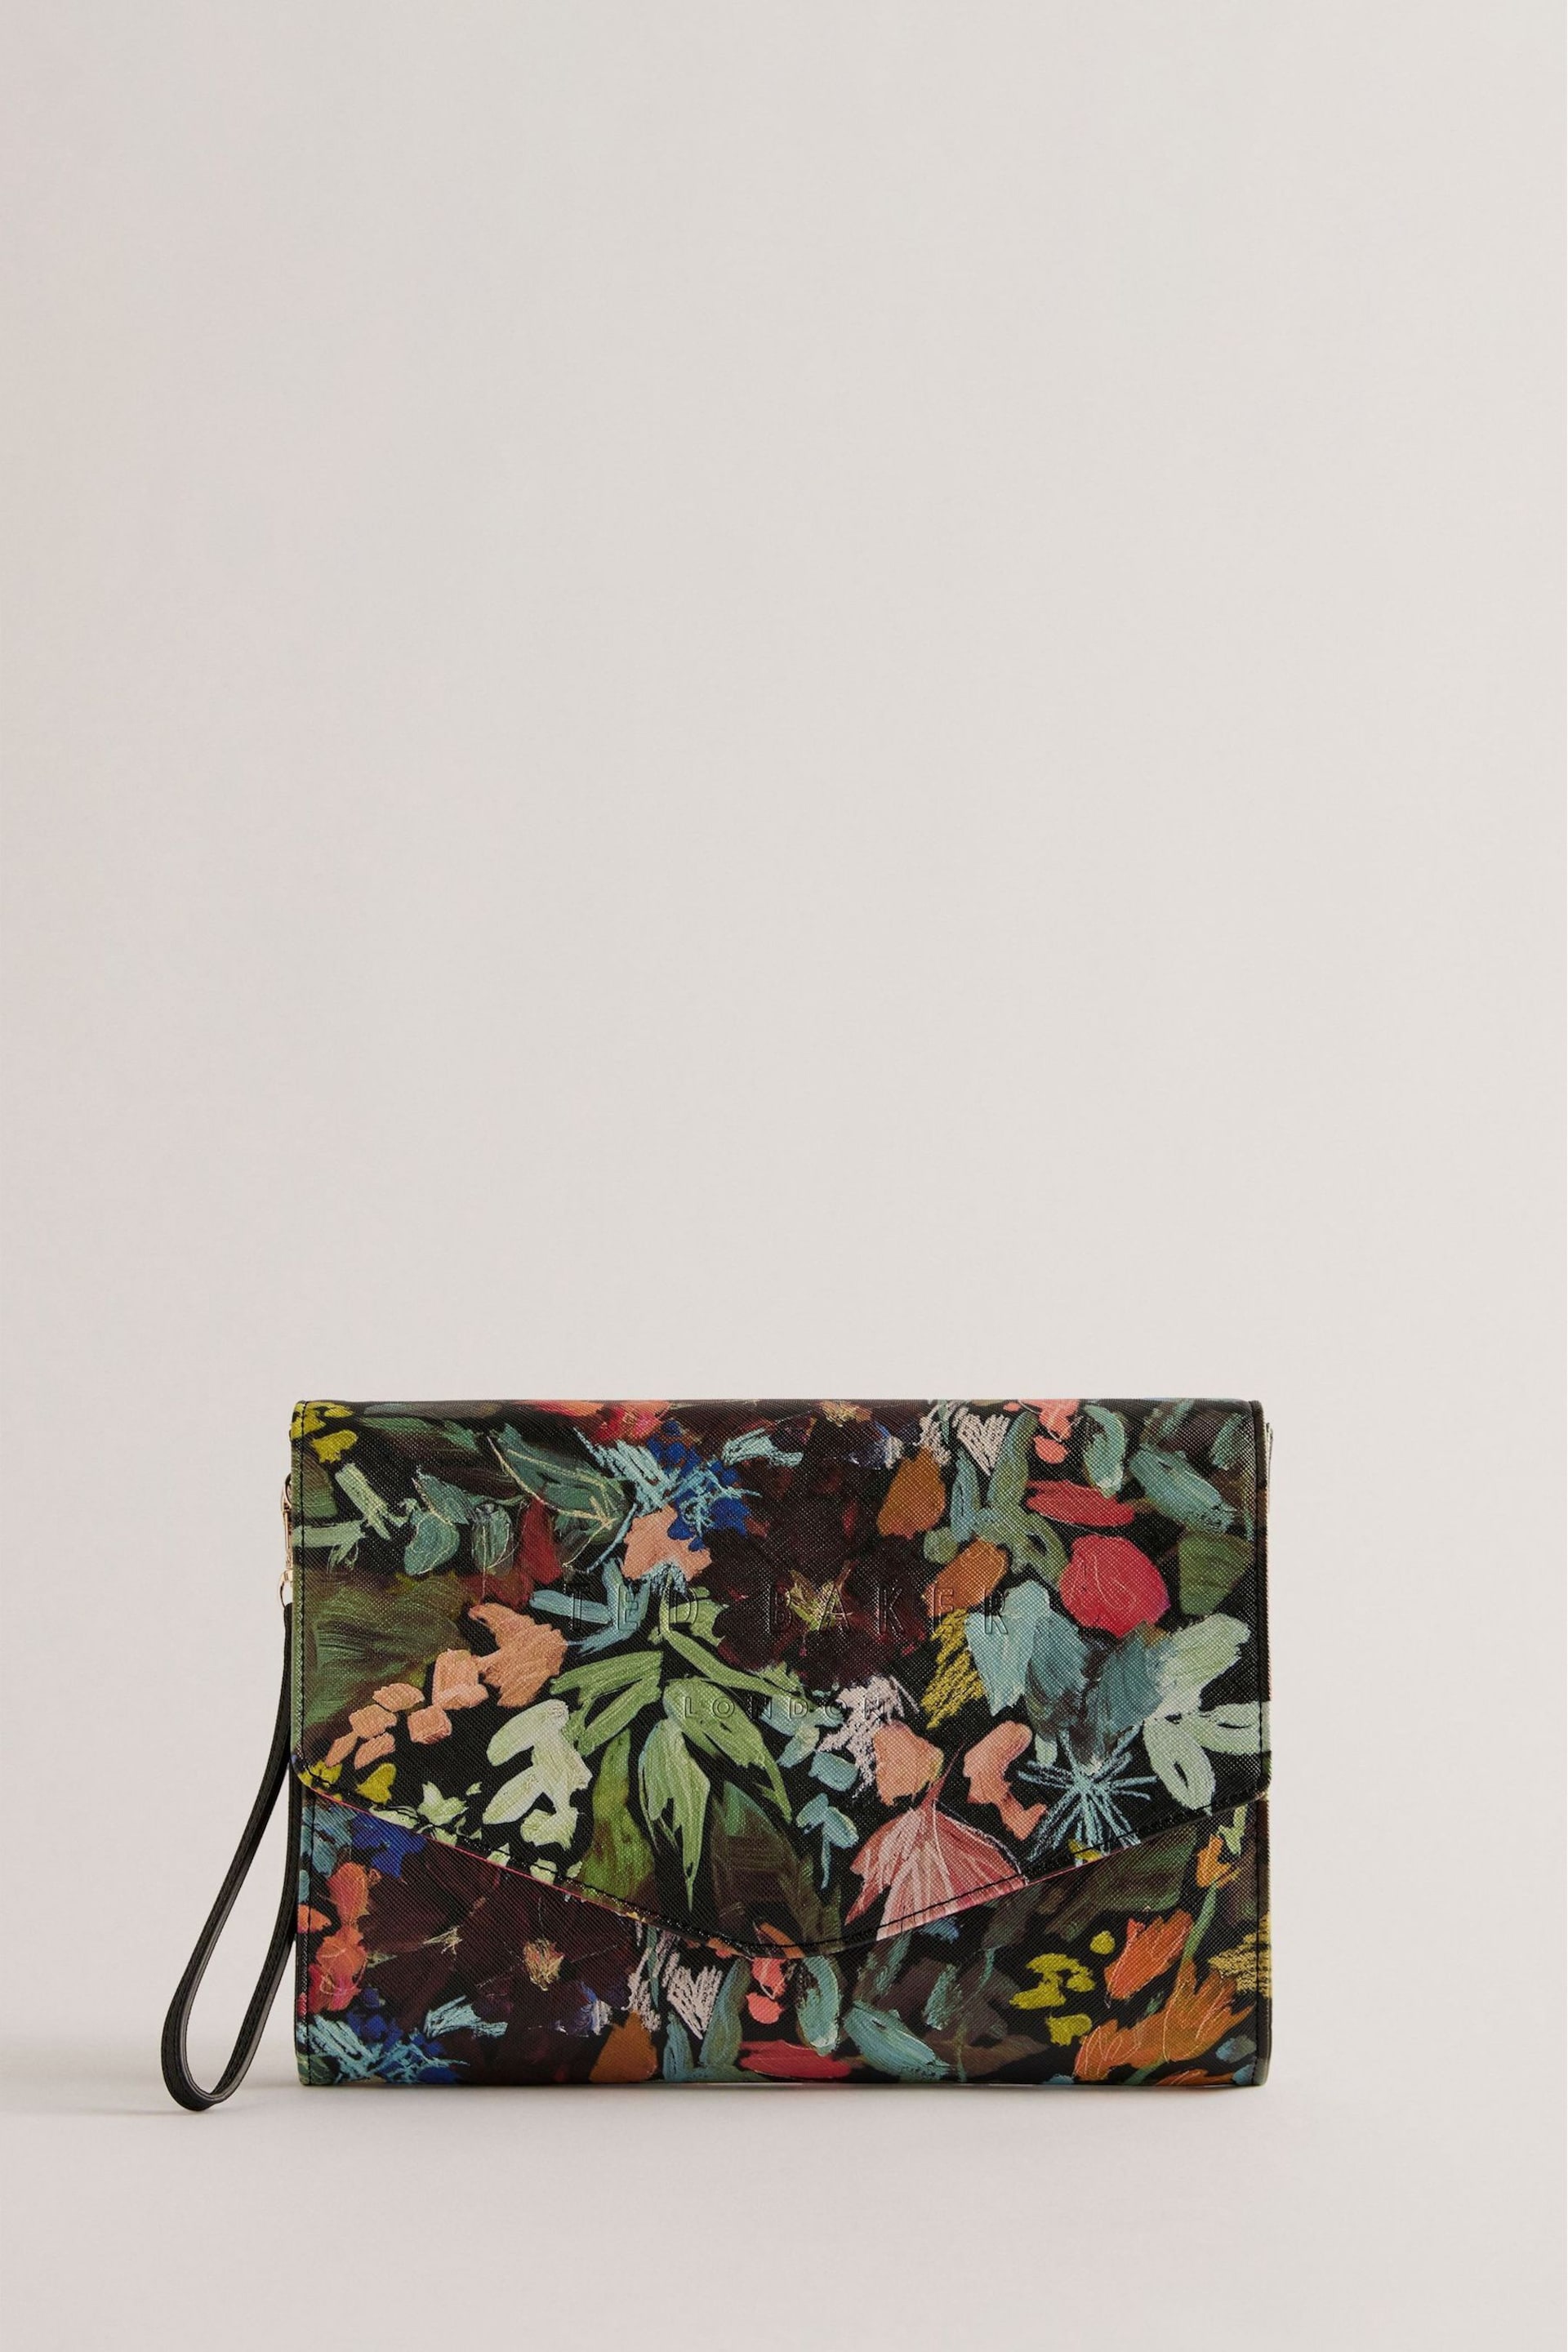 Ted Baker Black Painted Meadow Printed Beinina Pouch - Image 2 of 5